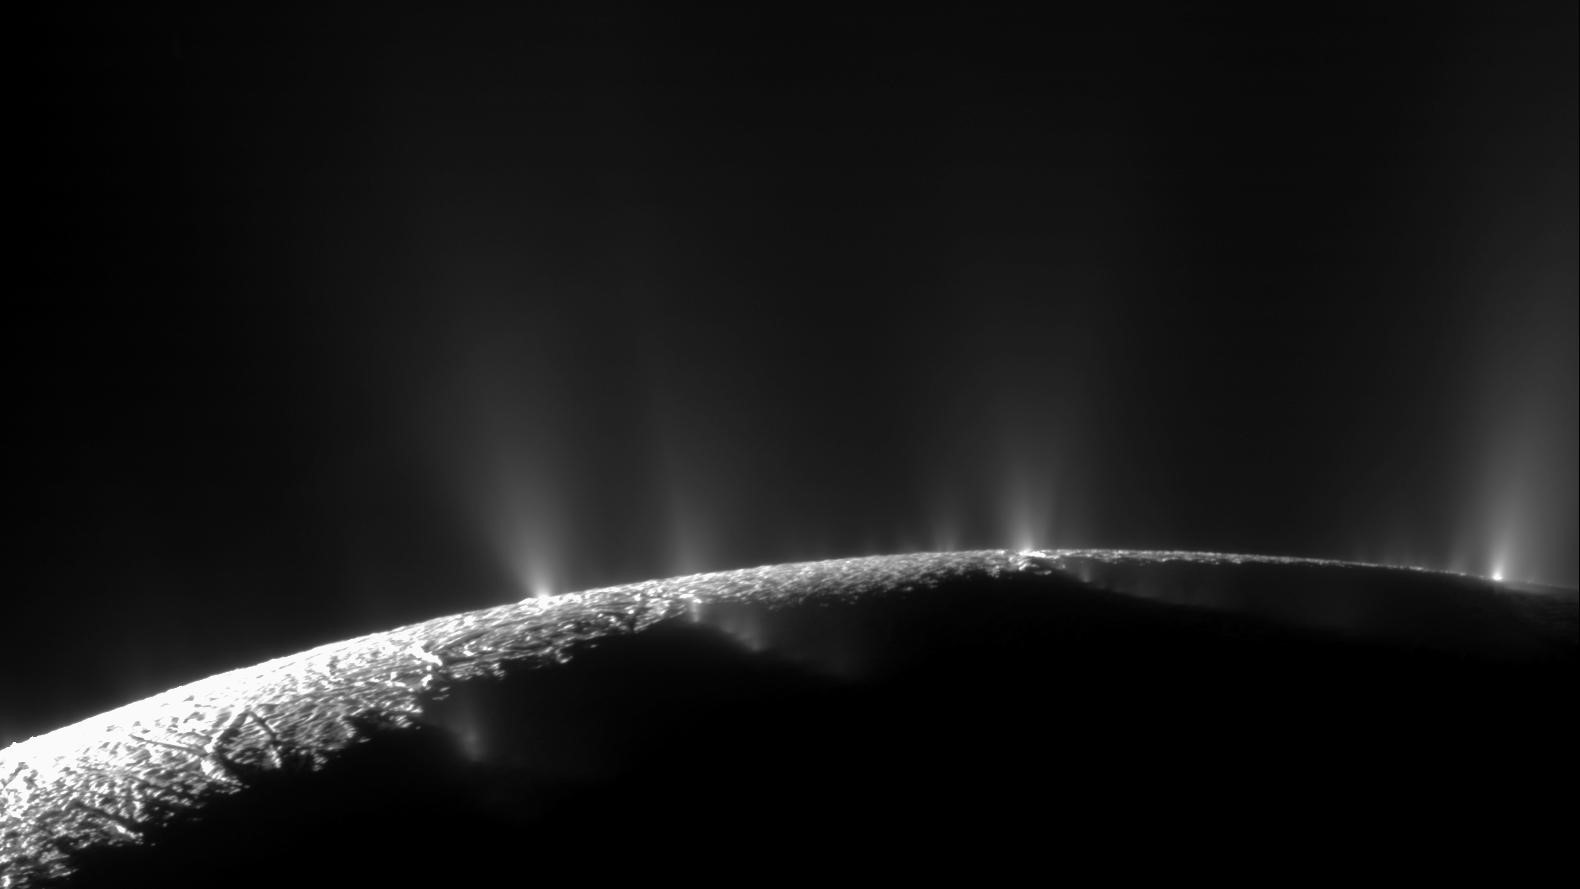 Enceladus' plumes could be carrying microorganisms within their water.